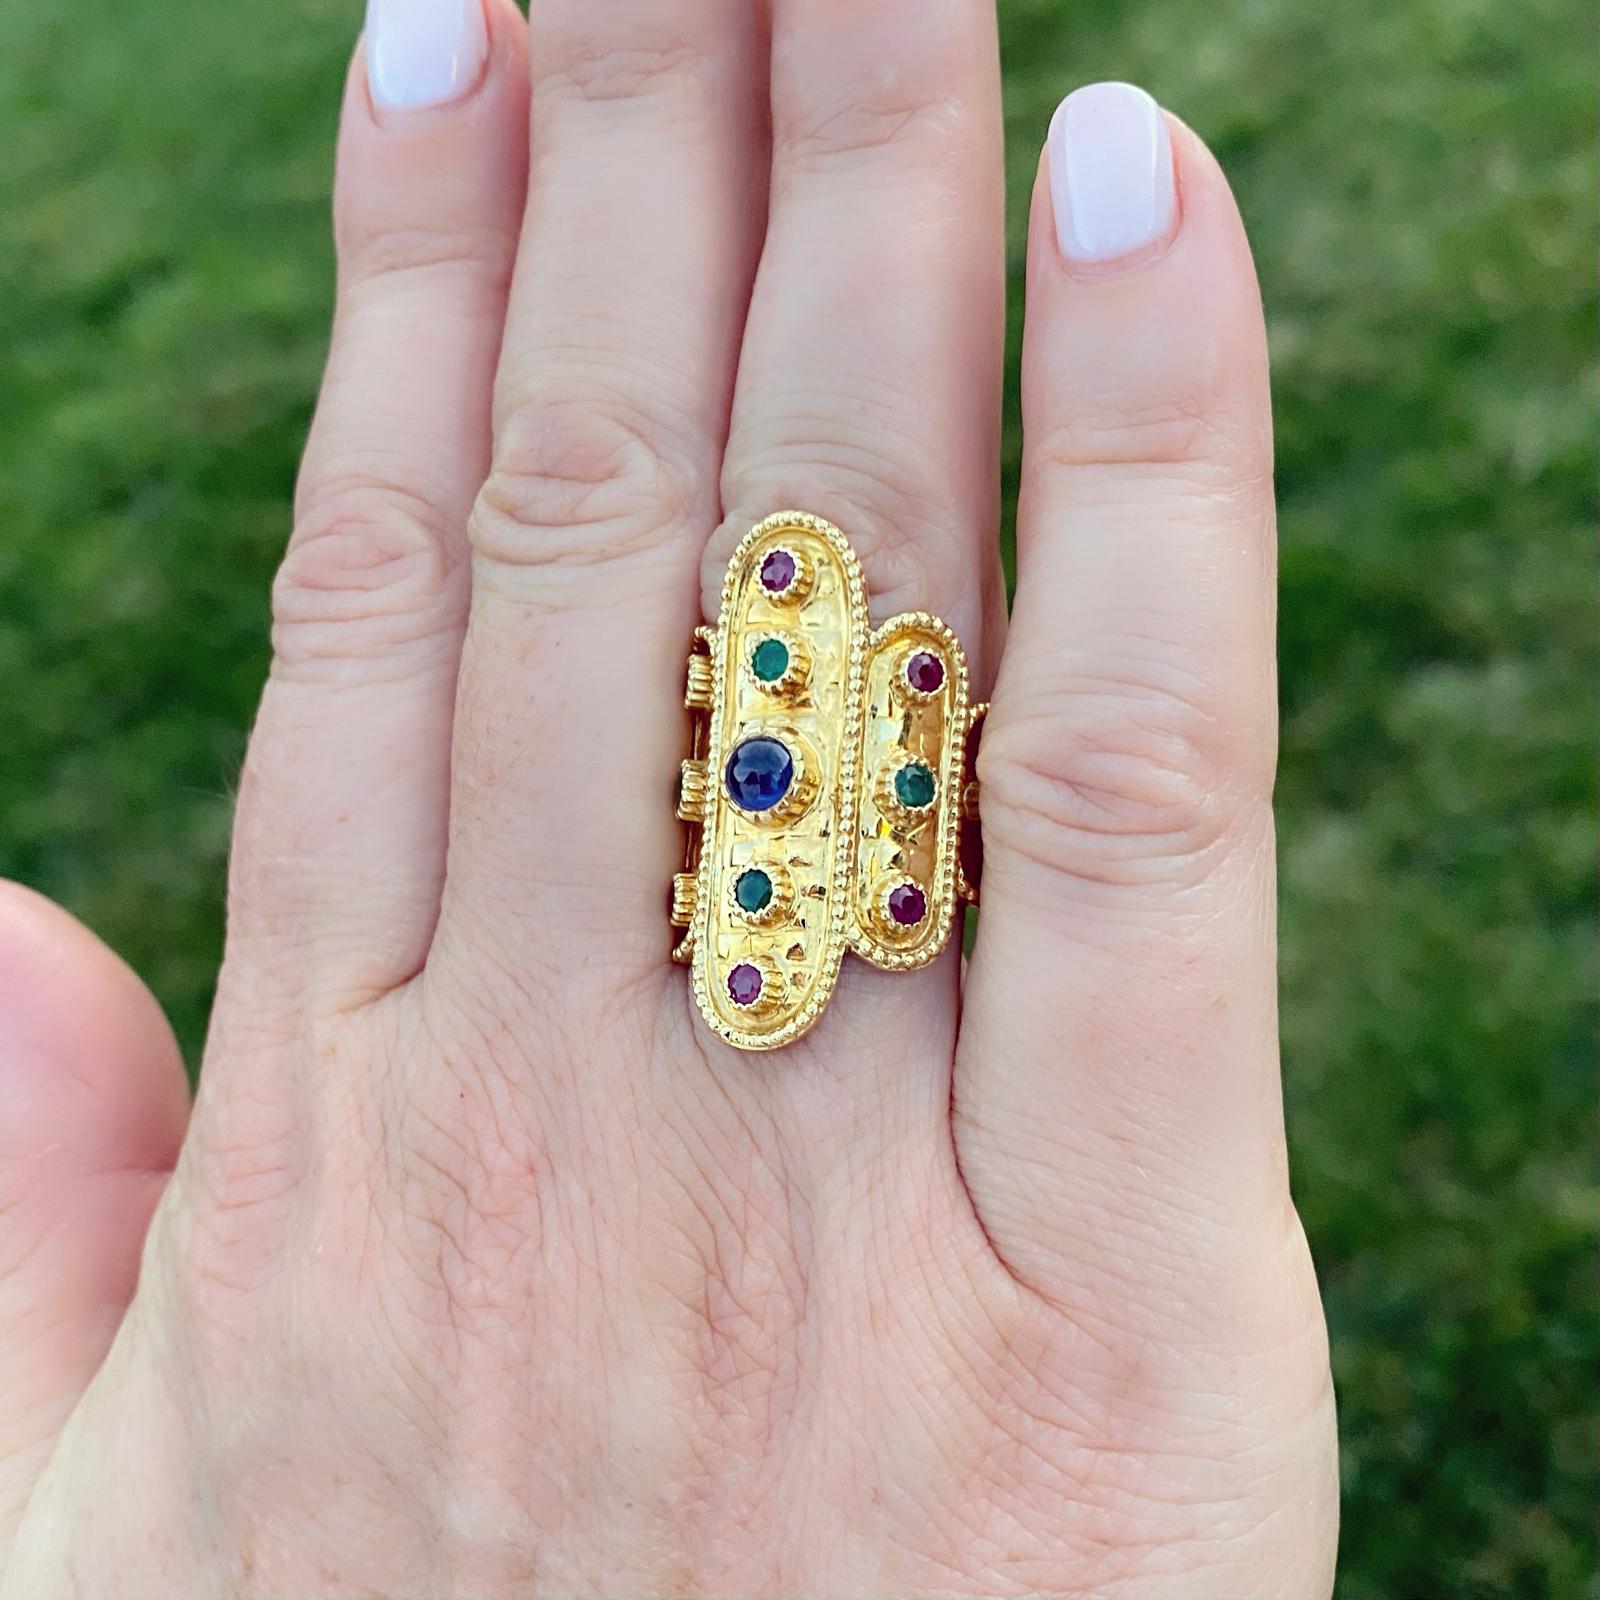 By Lalaounis, one of the most renowned Greek jewelry designers, this 18k gold ring makes a statement that can be worn every day. Designed with tapering cobblestone cartouches, each is bezel-set with a cabochon sapphire, with round-cut rubies and